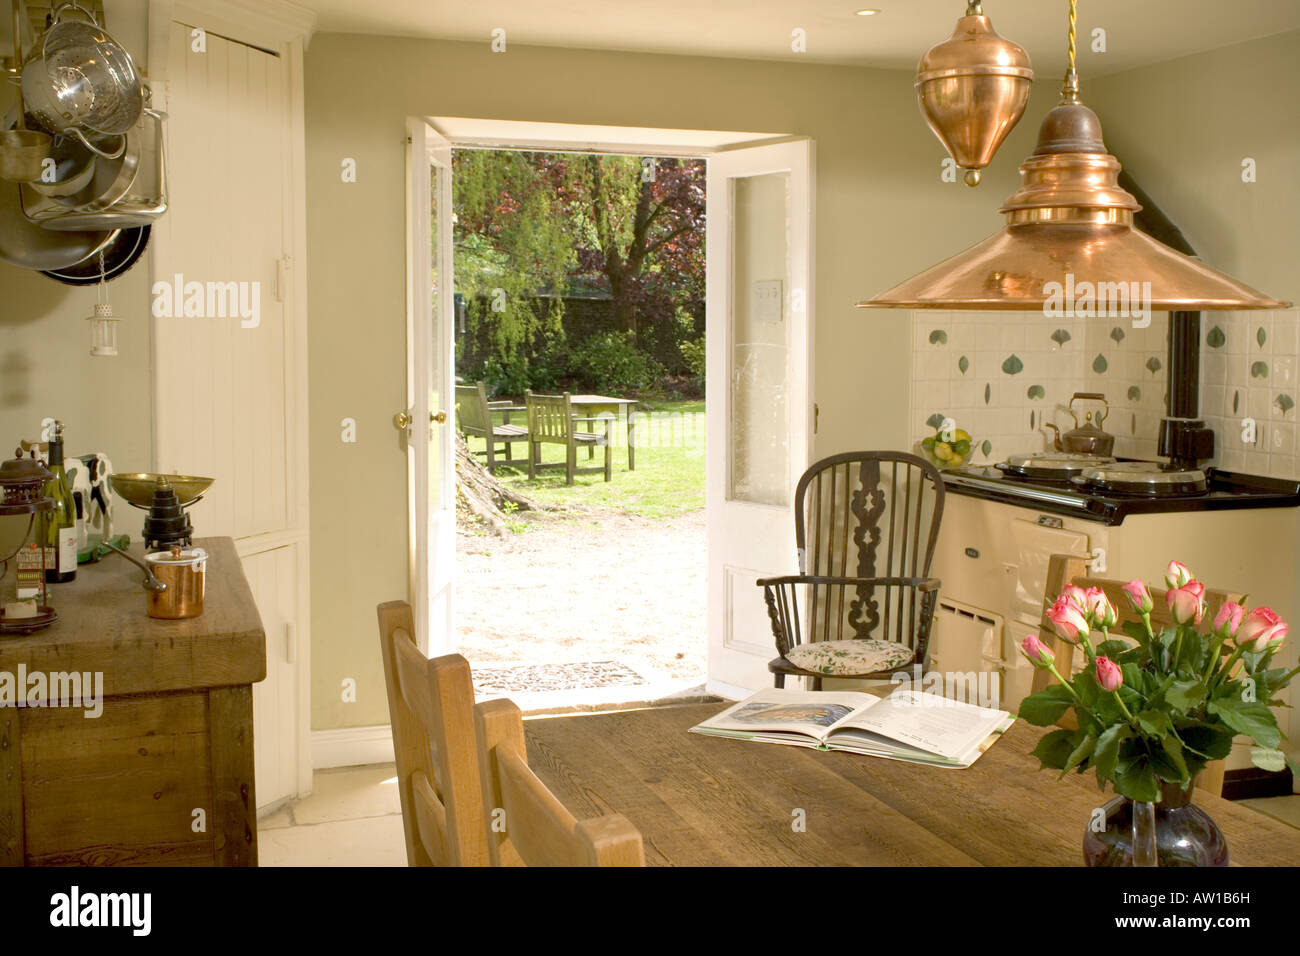 Home interior, traditional kitchen with Aga and open french doors. Stock Photo